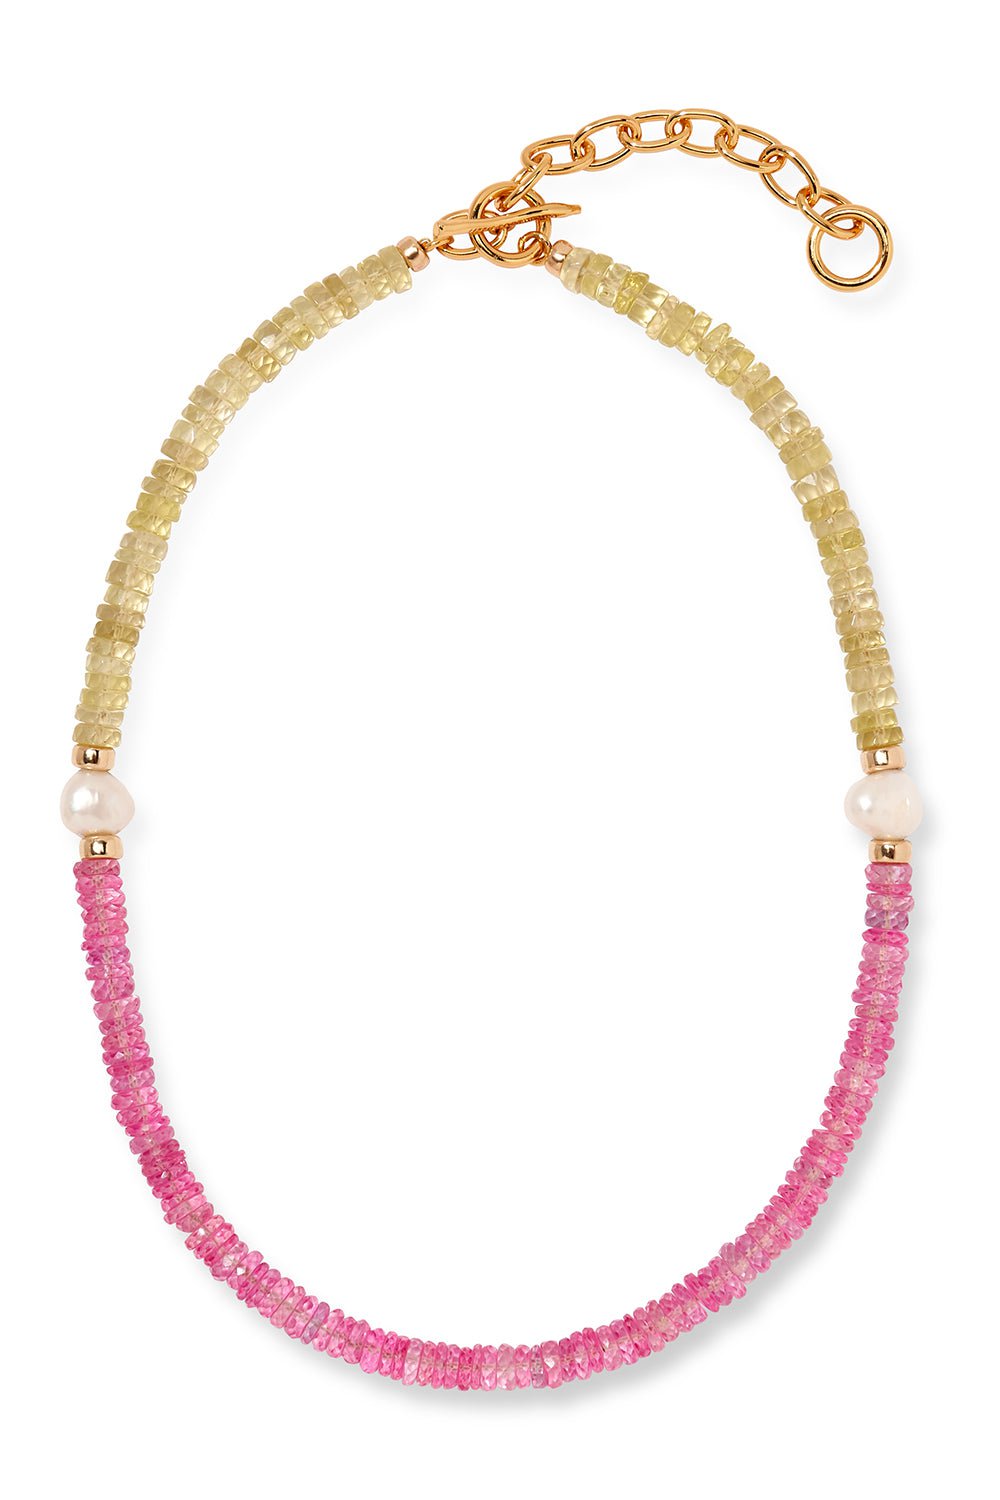 LIZZIE FORTUNATO-Pink Lemonade Rock Candy Necklace-PINK